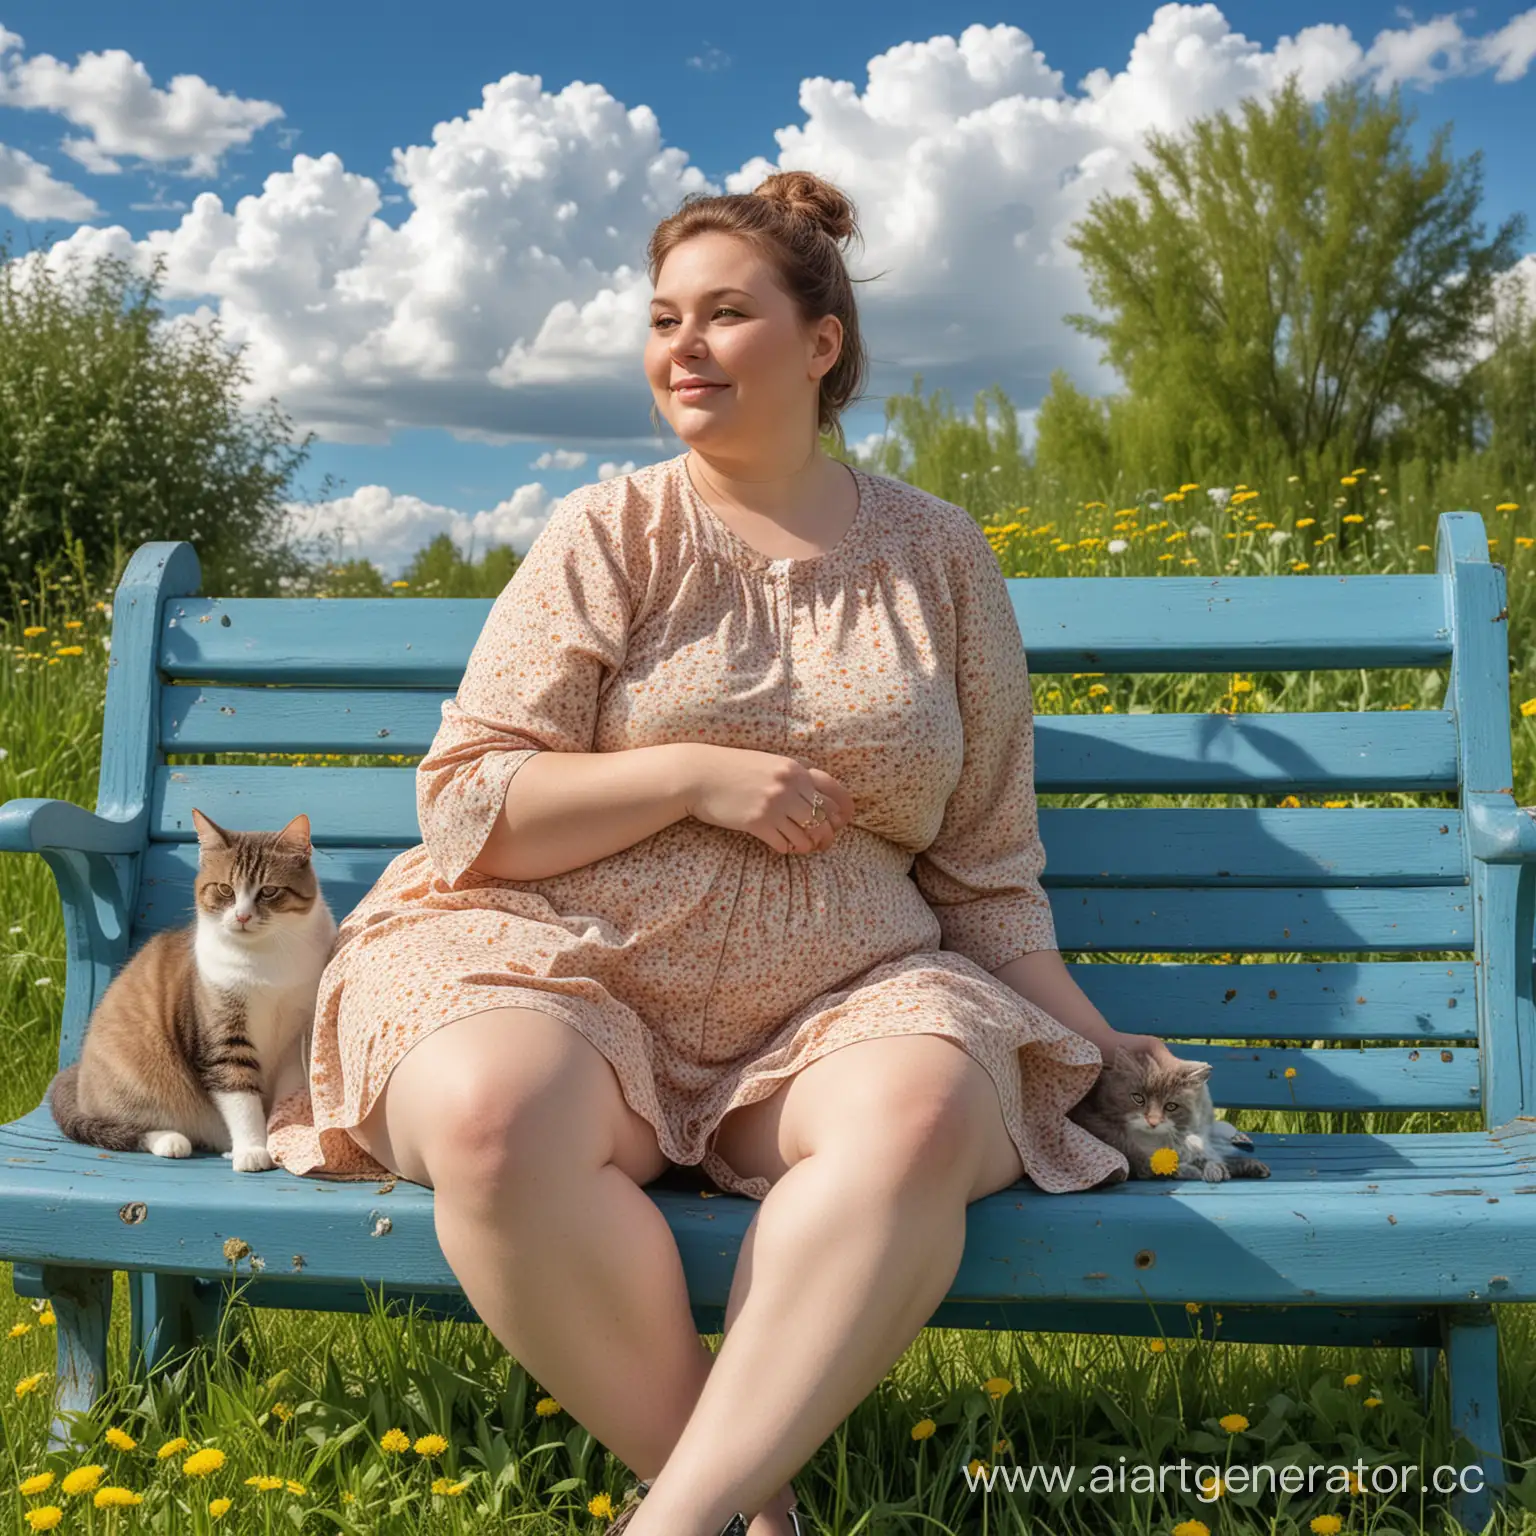 Spring, realistic photo portrait of a slightly overweight lady 35 years old with a hairstyle, sitting on a blue bench, on the green grass with dandelions, playfully purring cat, blue sky, white clouds,